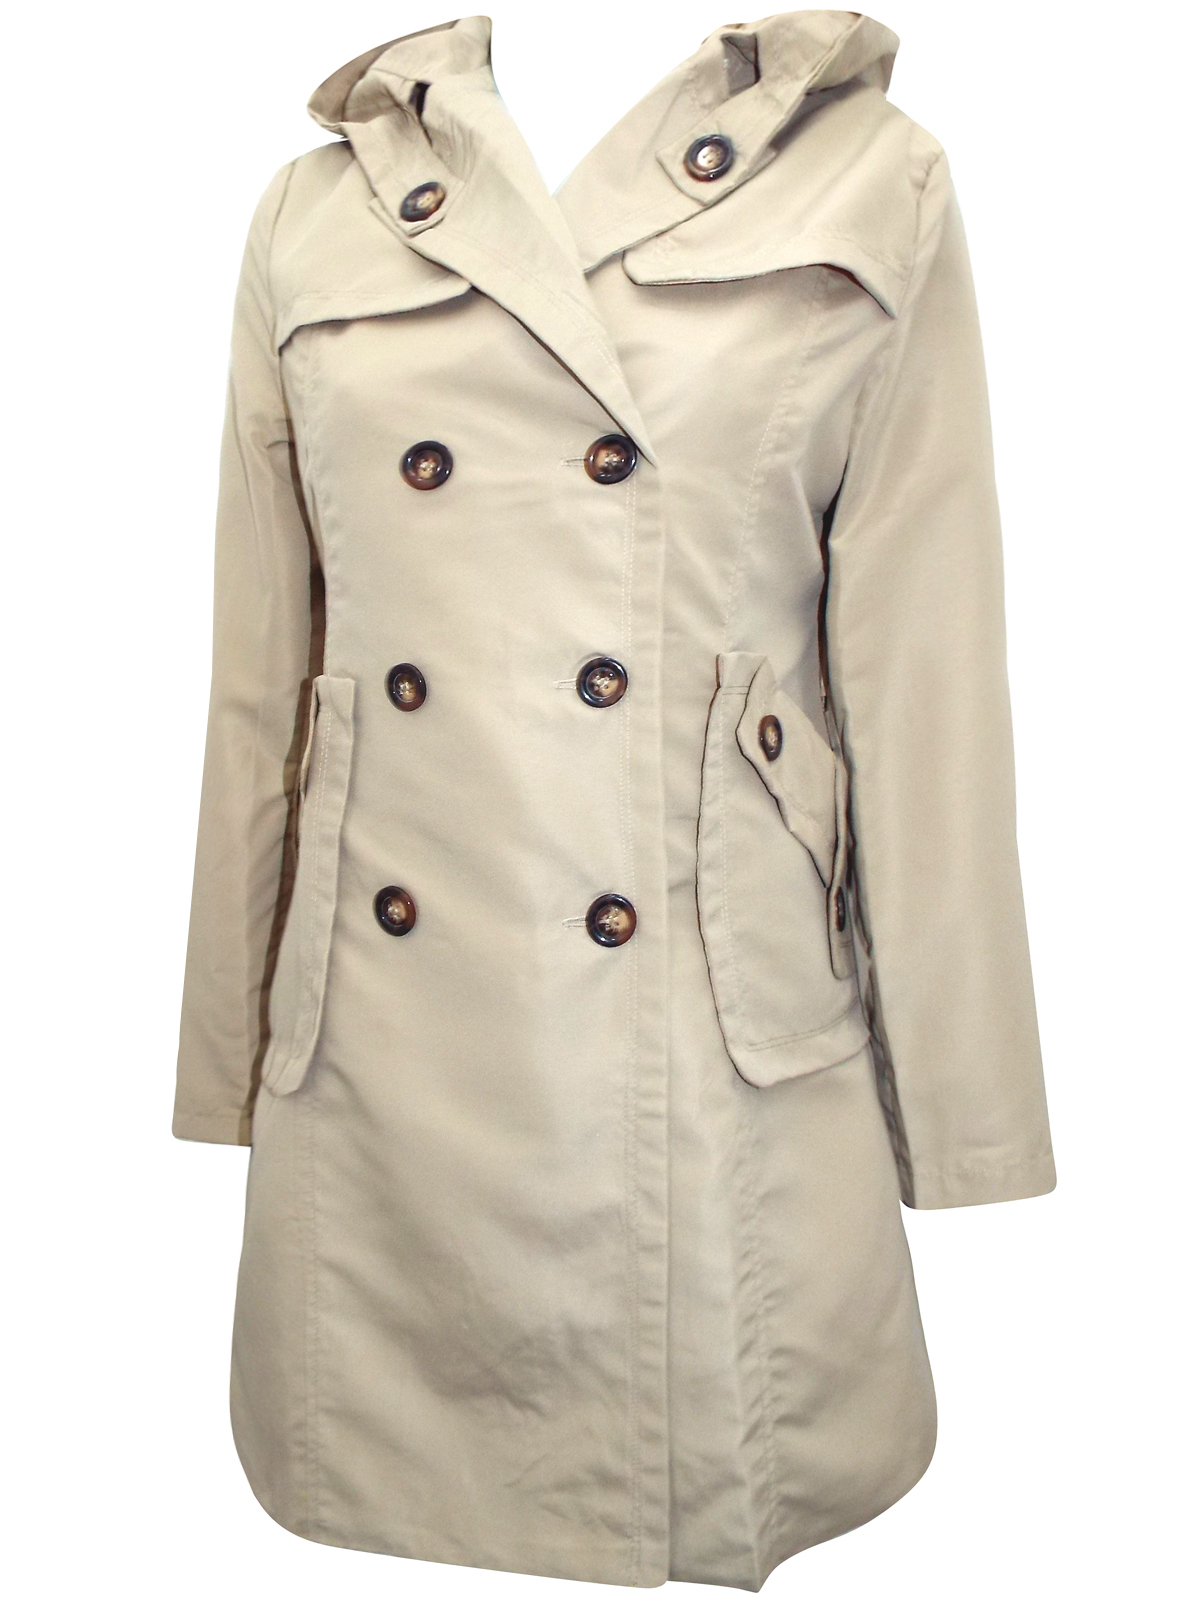 3SUISSES - - 3SUISSES SAND Hooded Trench Coat - Size 12/14 to 16/18 (EU ...